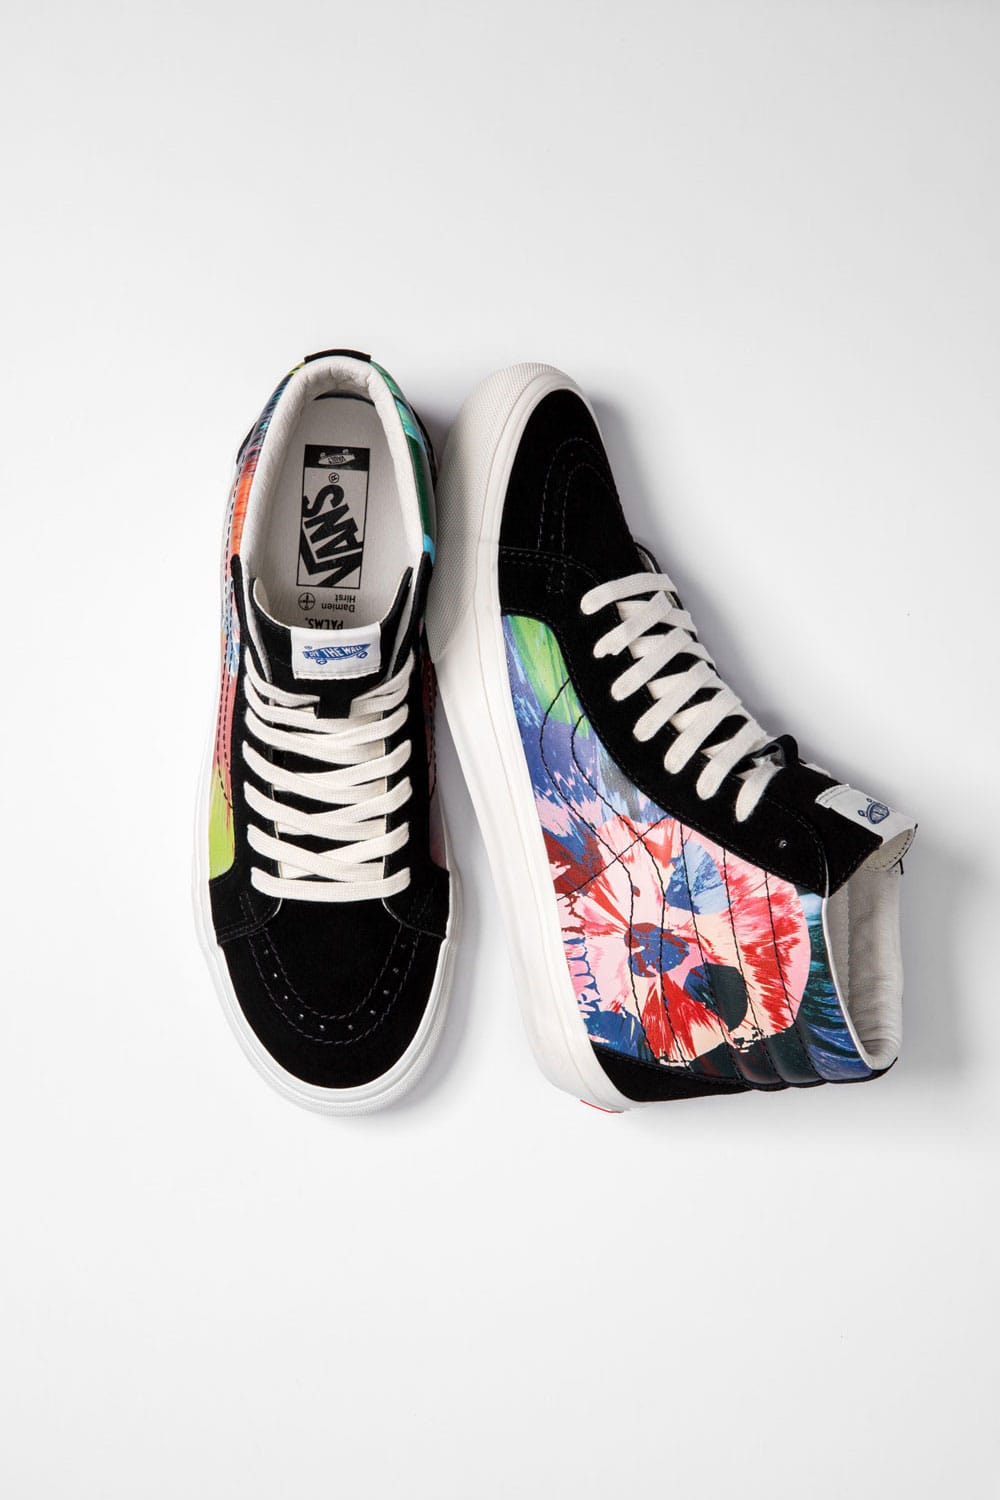 vans palms collection